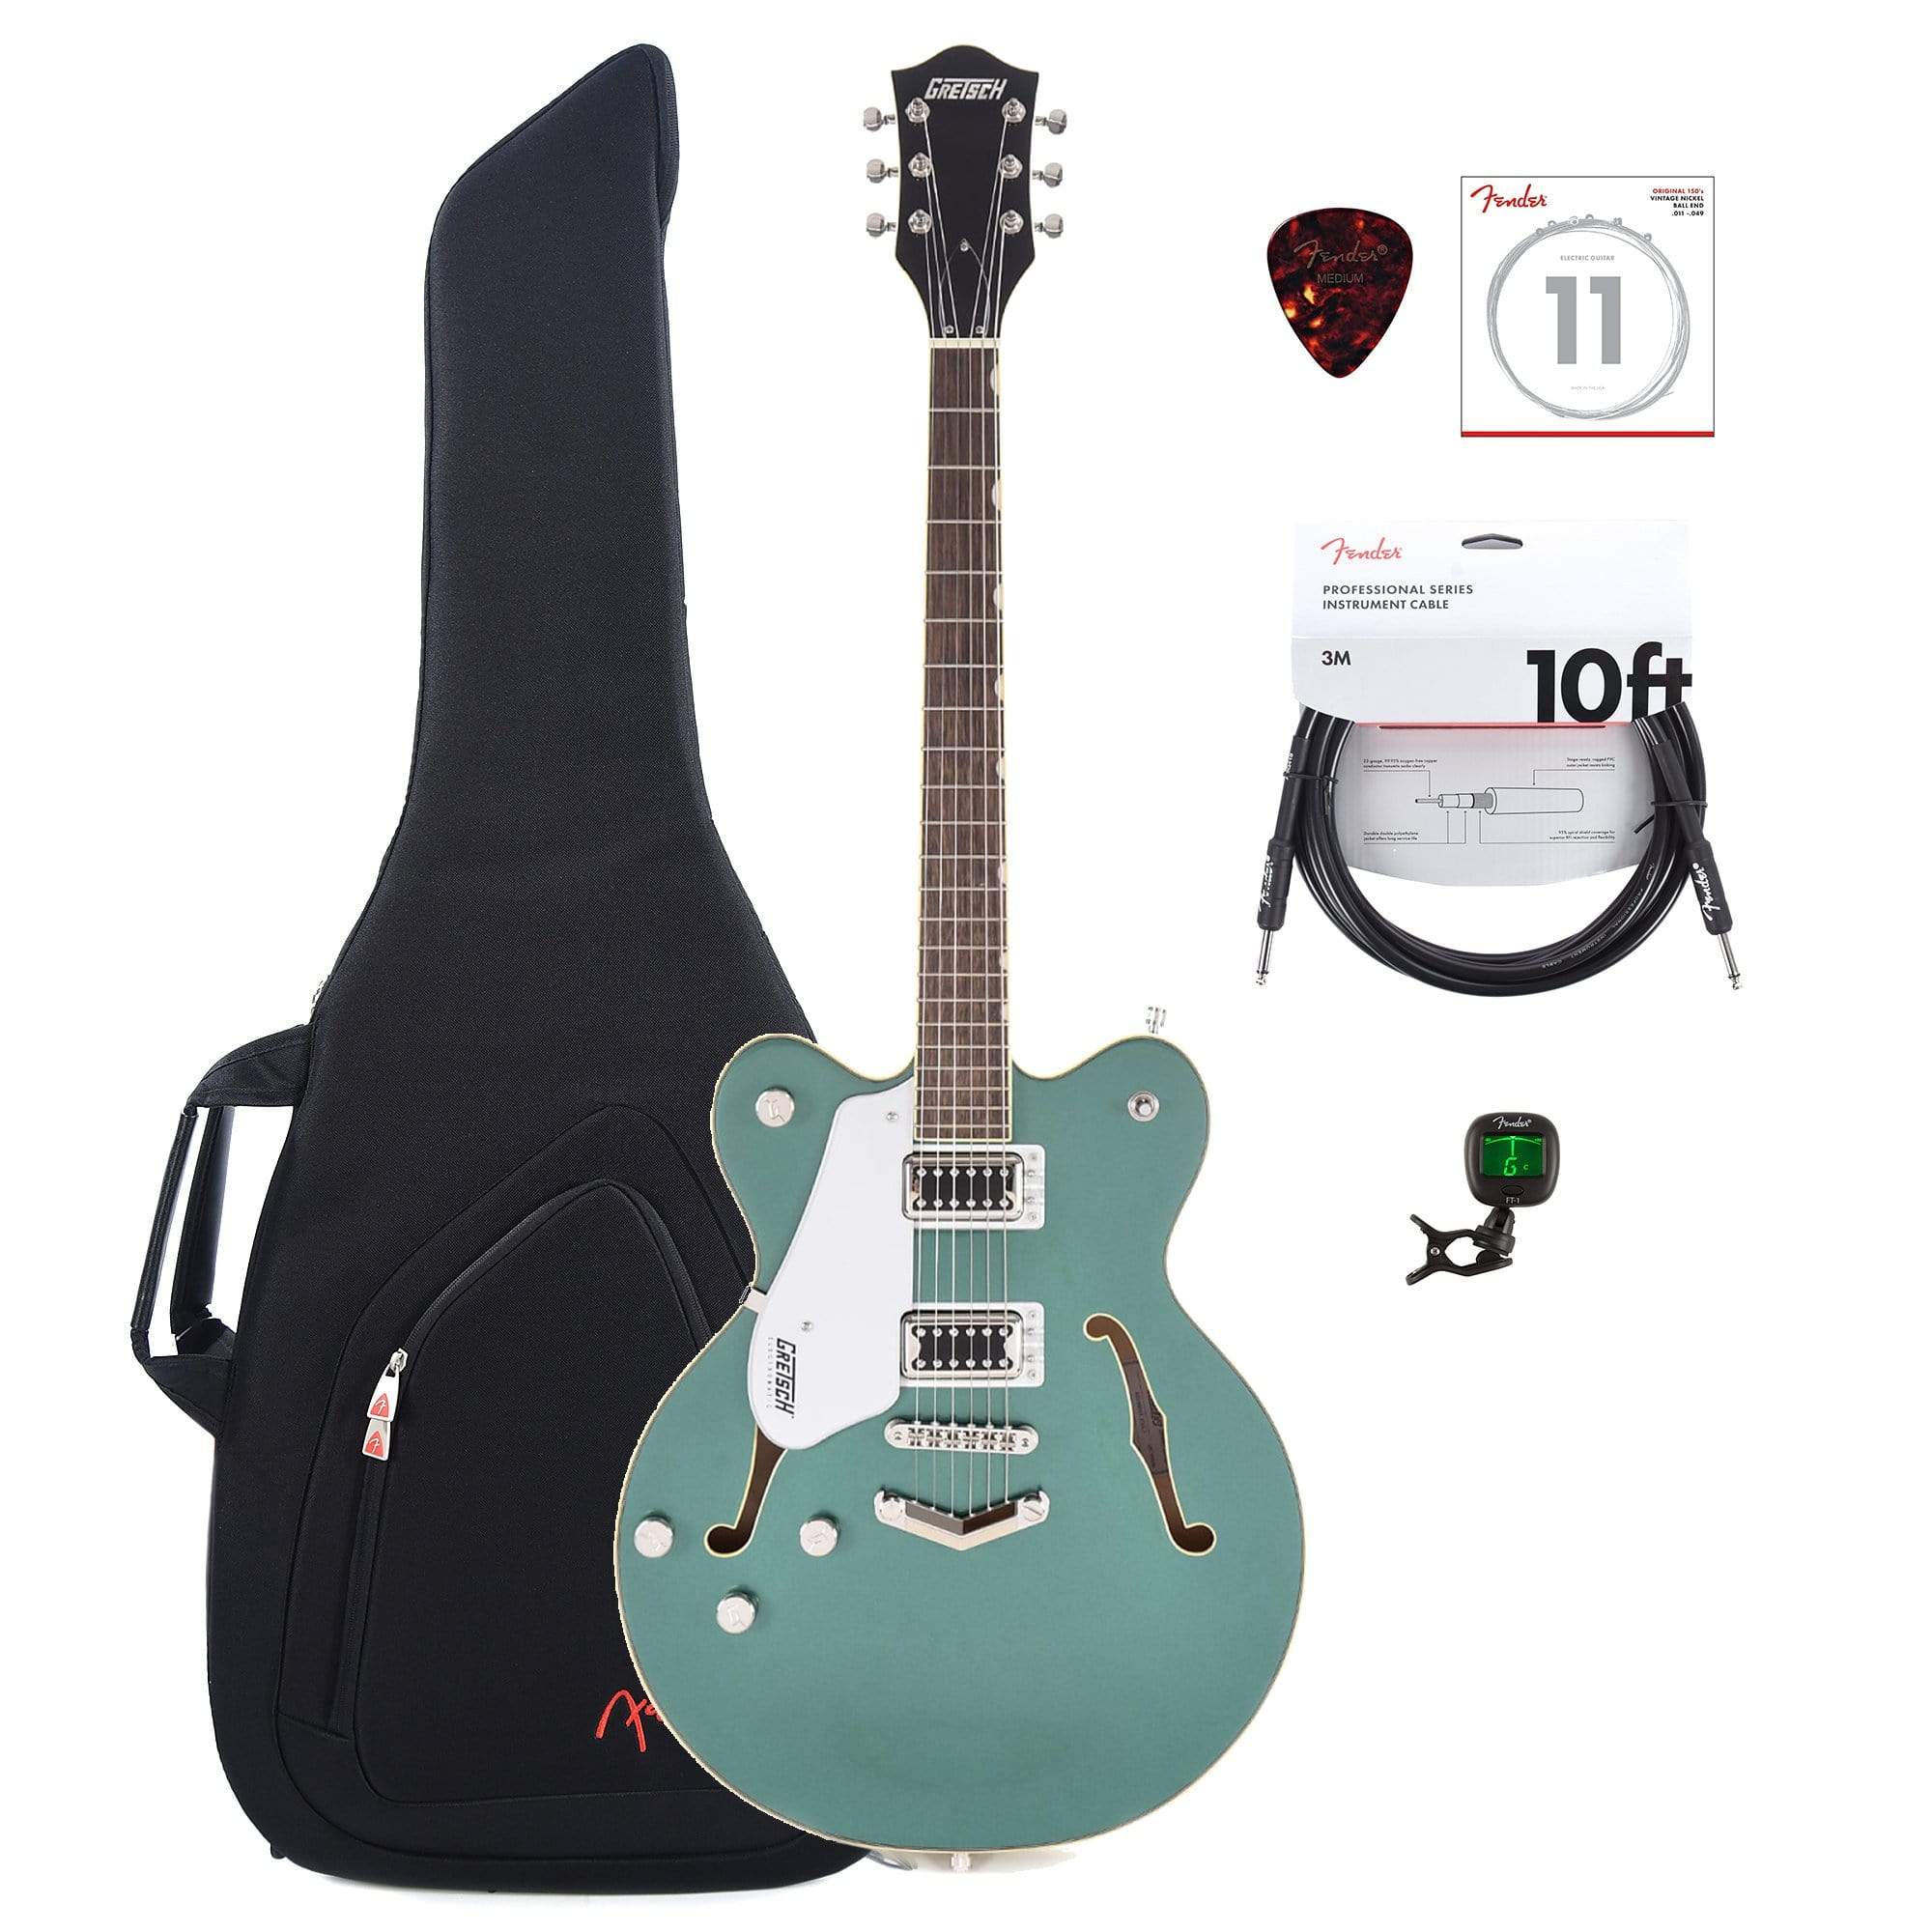 Gretsch G5622LH Electromatic Center Block Double-Cut Georgia Green w/V-Stoptail LEFTY w/Gig Bag, Tuner, (1) Cable, Picks and Strings Bundle Electric Guitars / Hollow Body